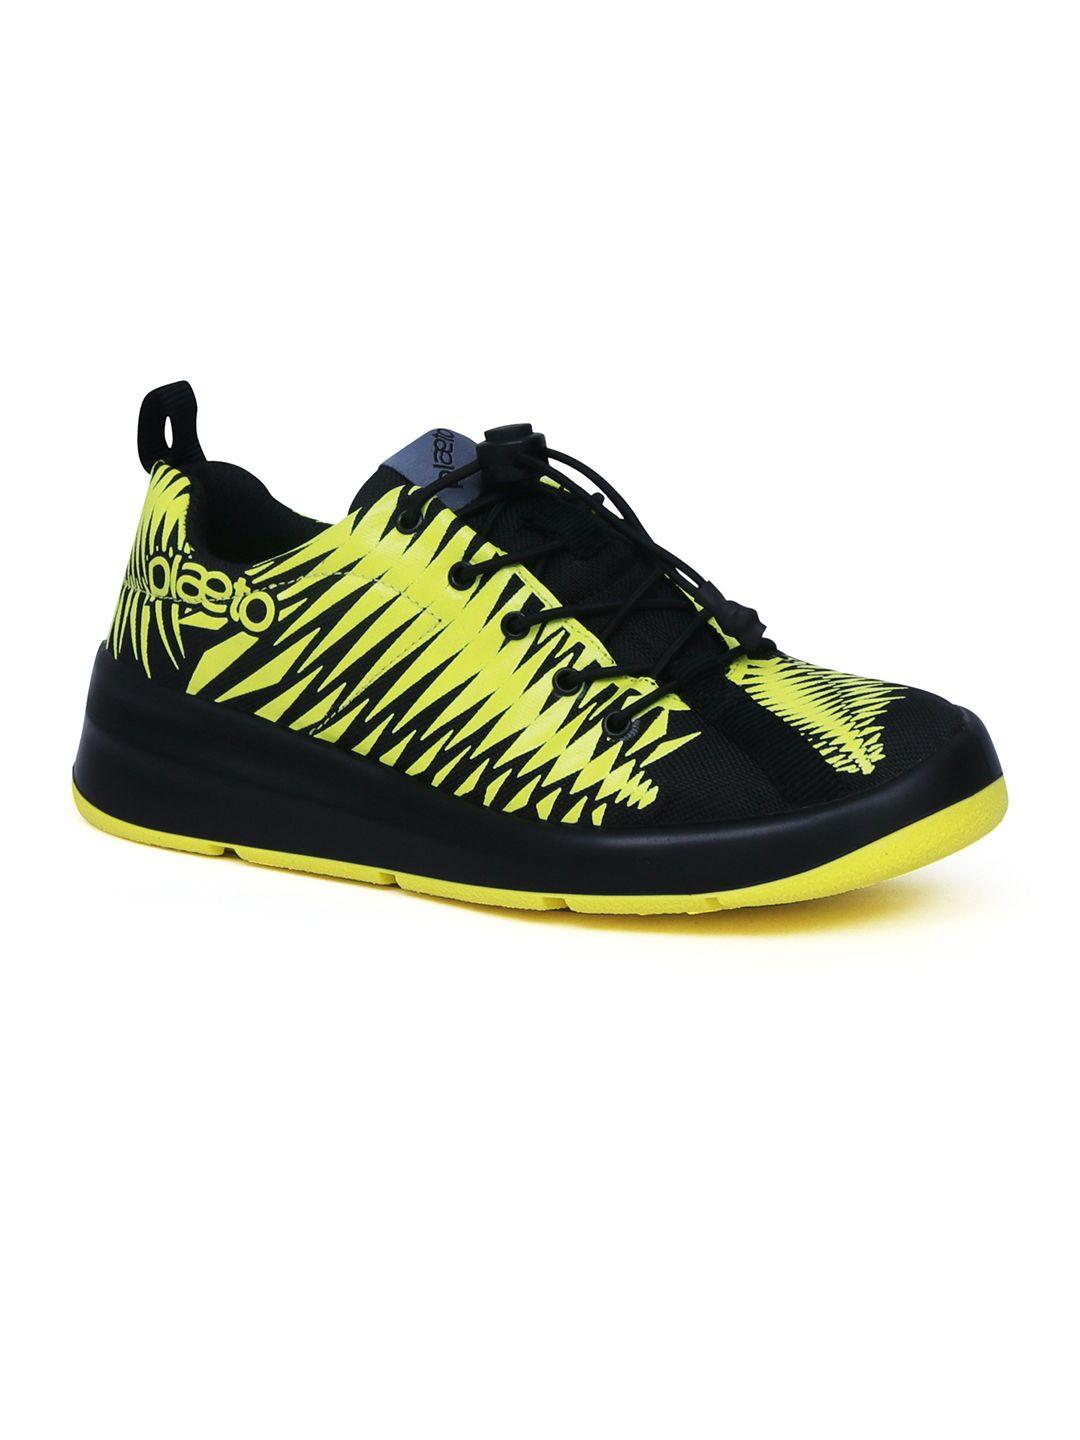 plaeto kids ivy non-marking multiplay sports shoes